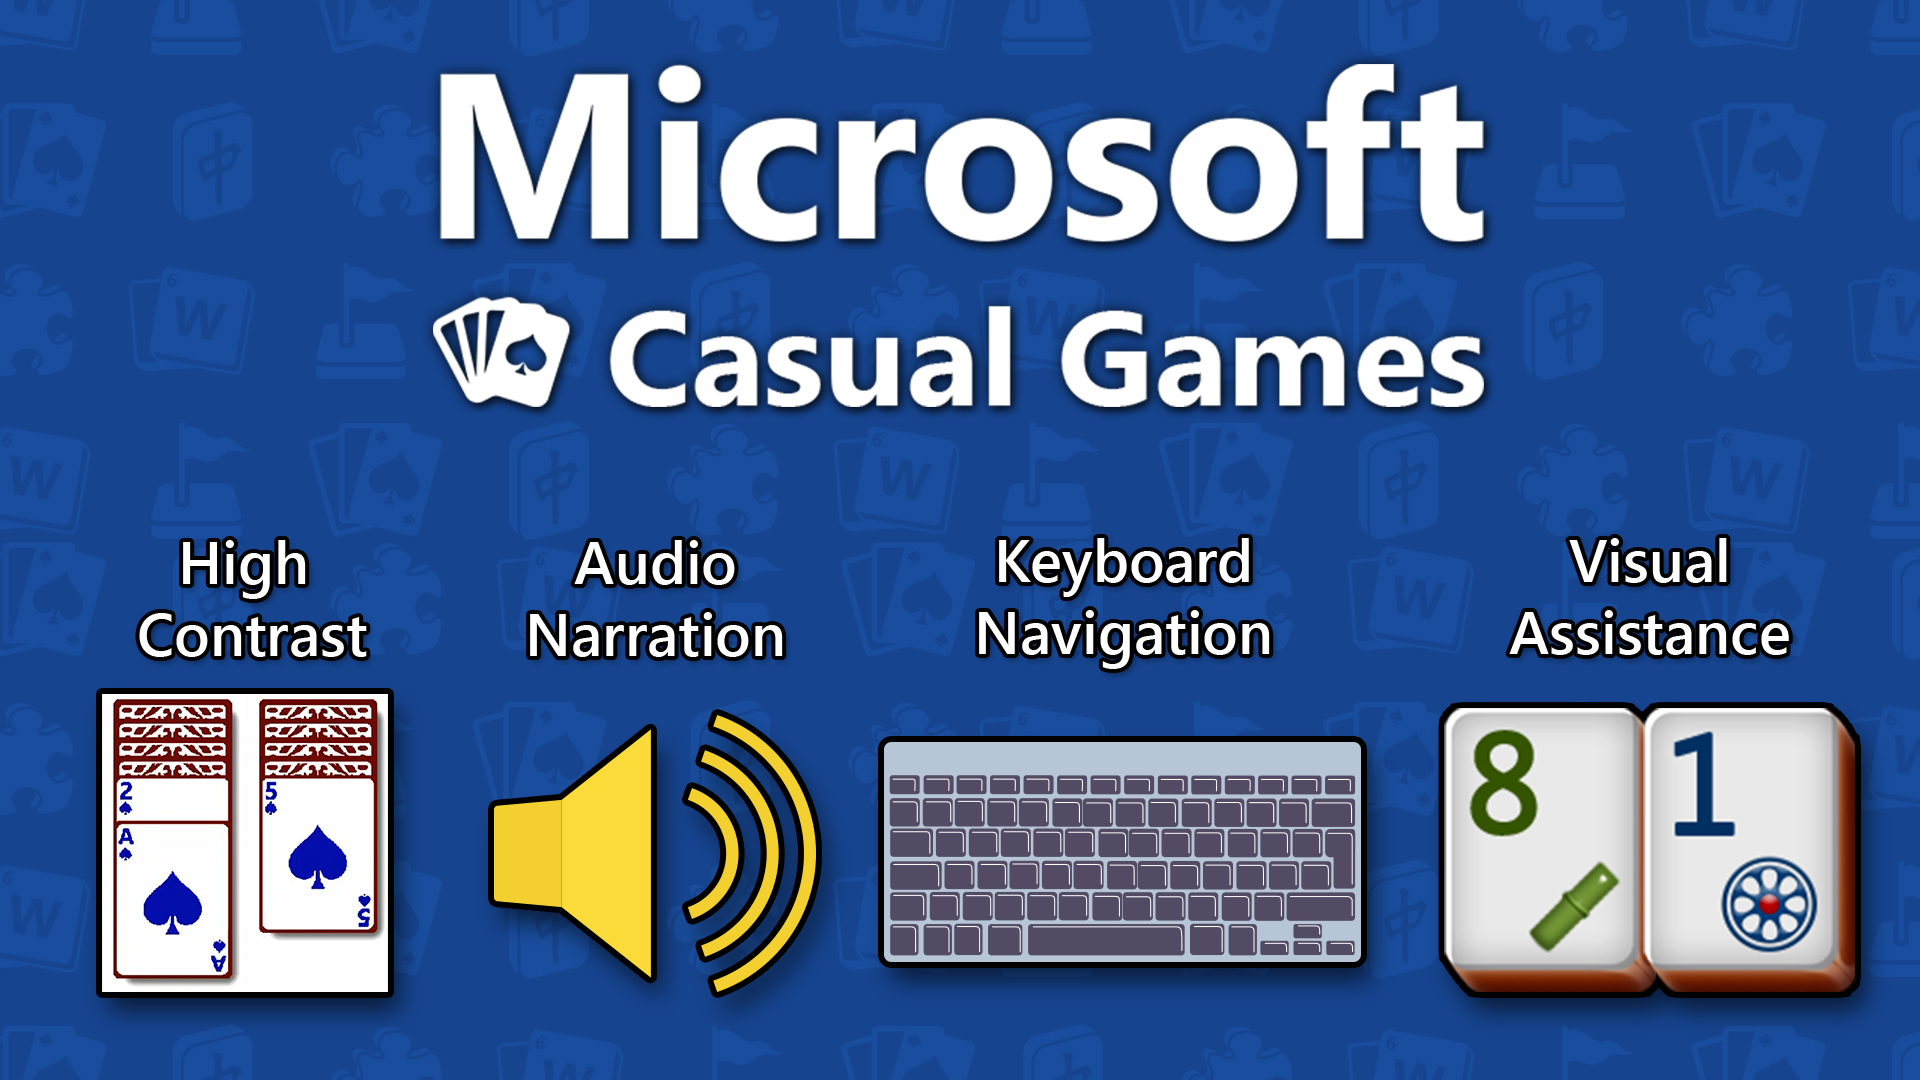 The Microsoft Casual Games logo with four graphics representing High Contrast, Audio Narration, Keyboard Navigation, and Visual Assistance.